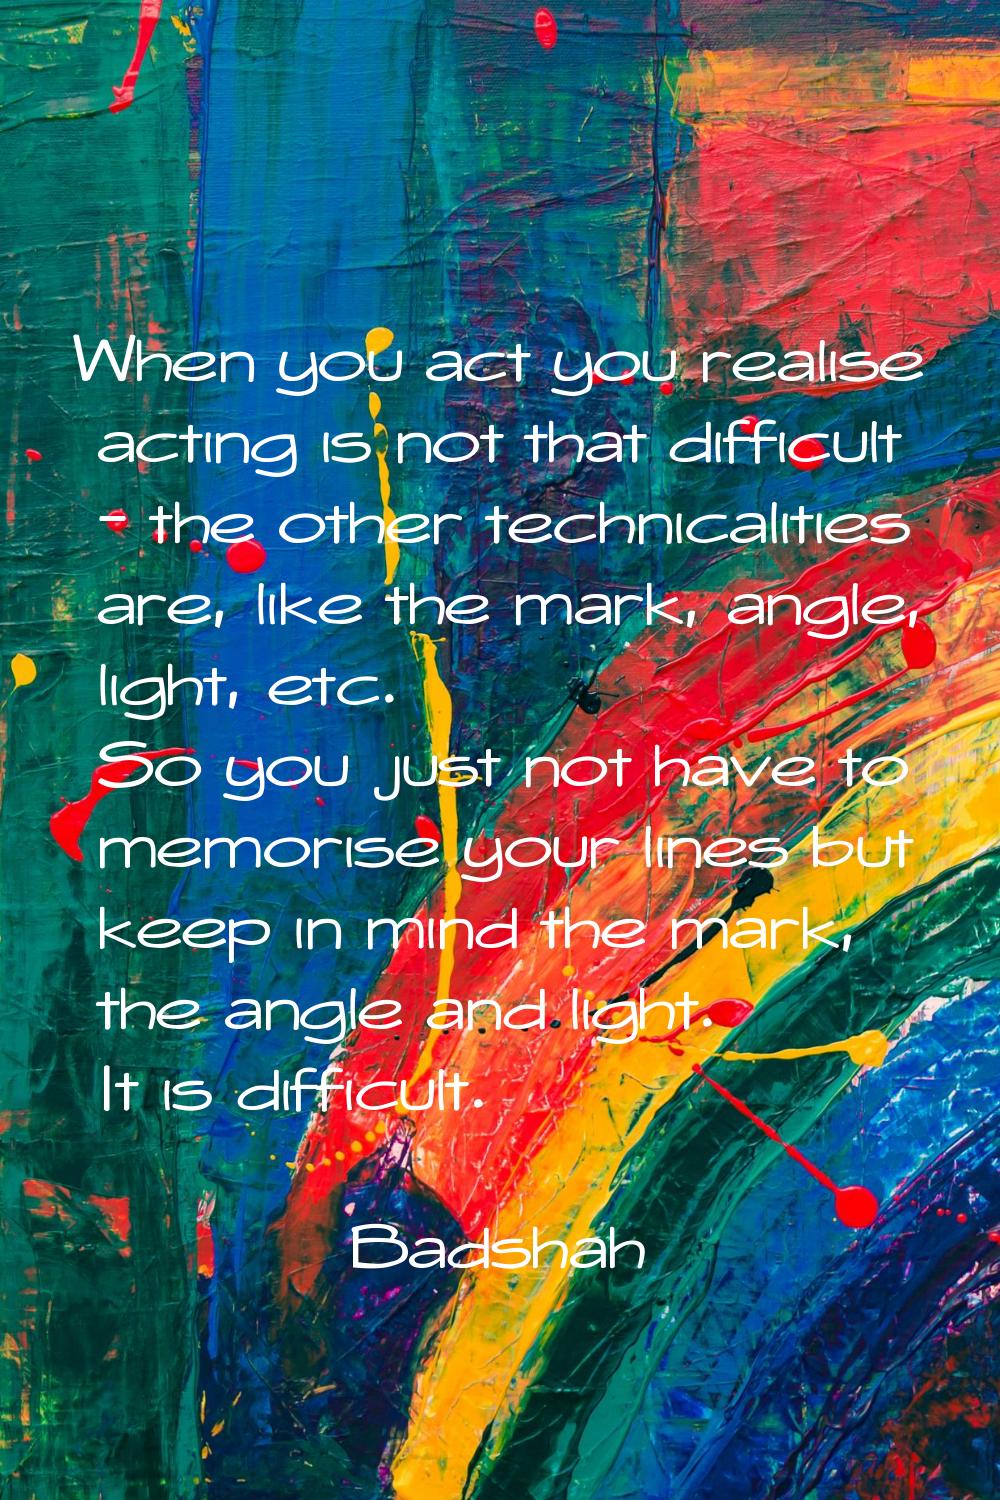 When you act you realise acting is not that difficult - the other technicalities are, like the mark